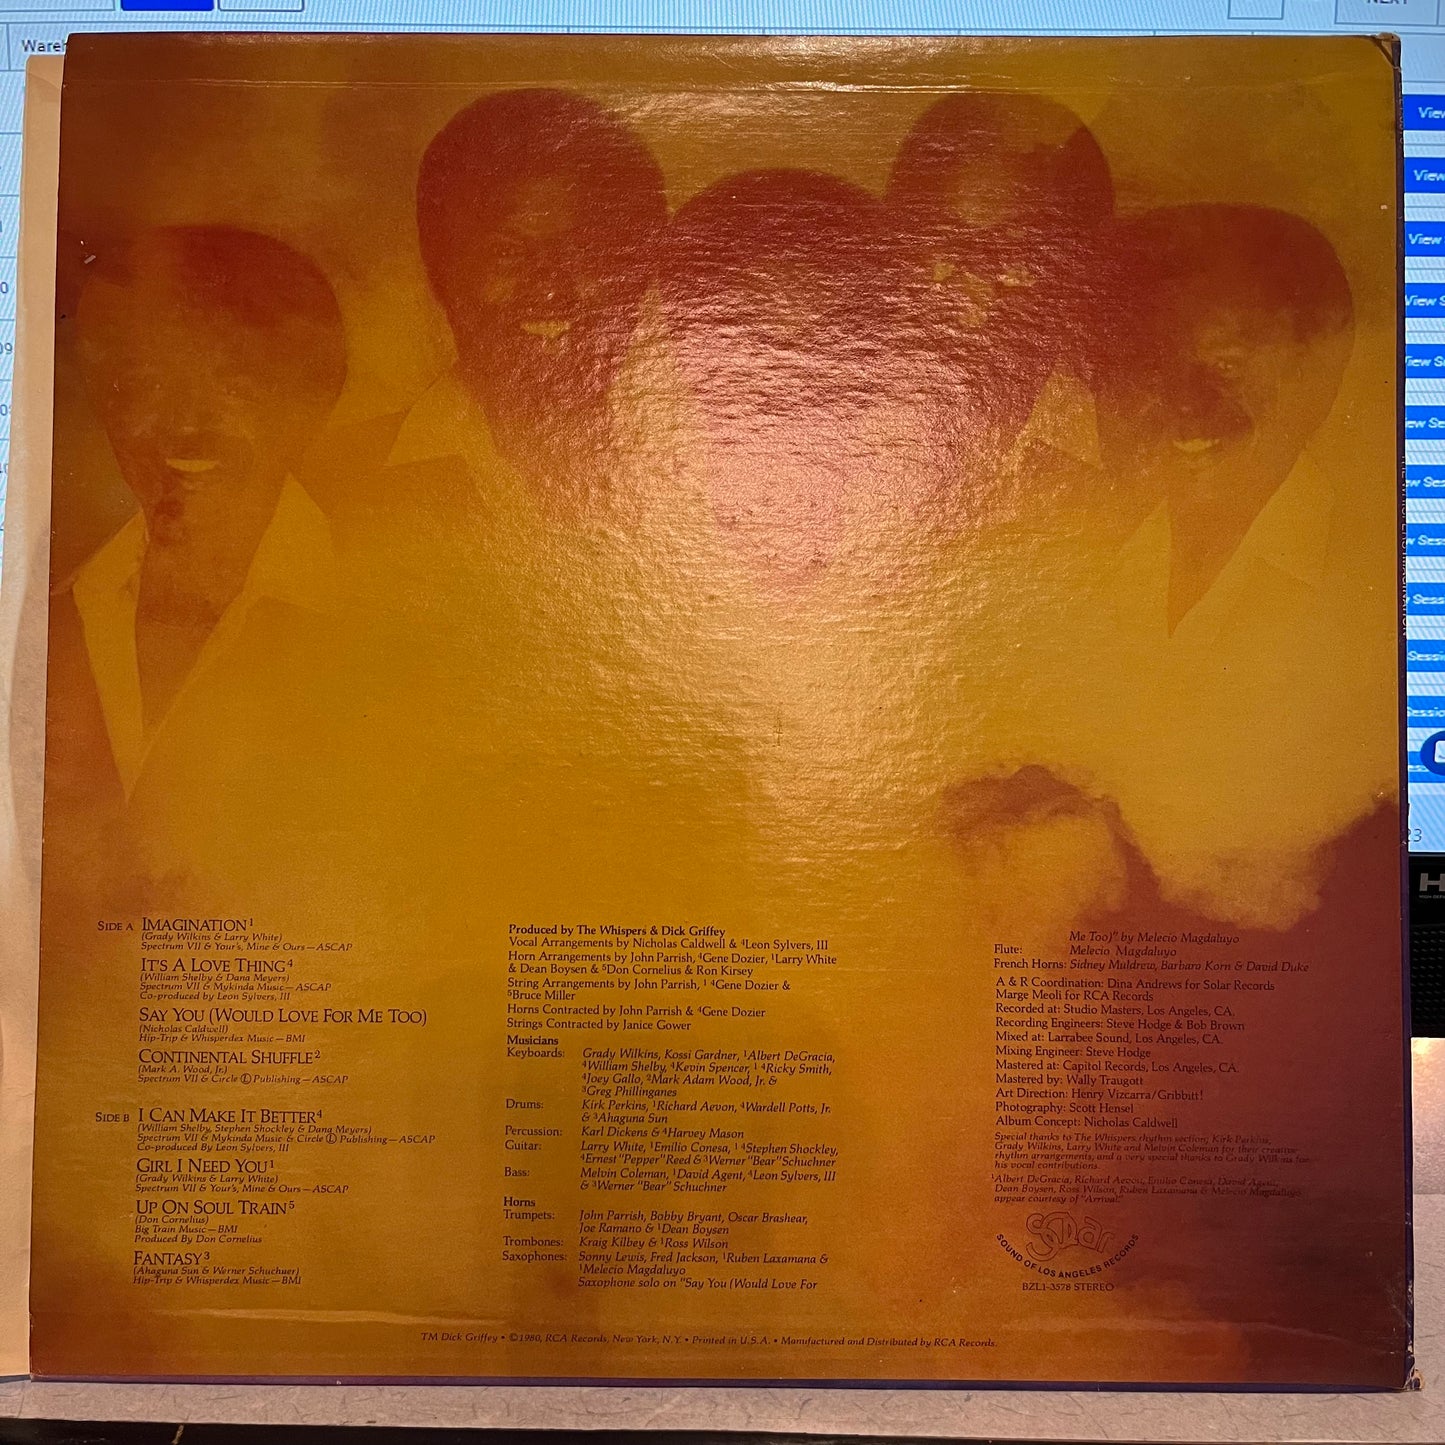 The Whispers Imagination LP Near Mint (NM or M-) Near Mint (NM or M-)